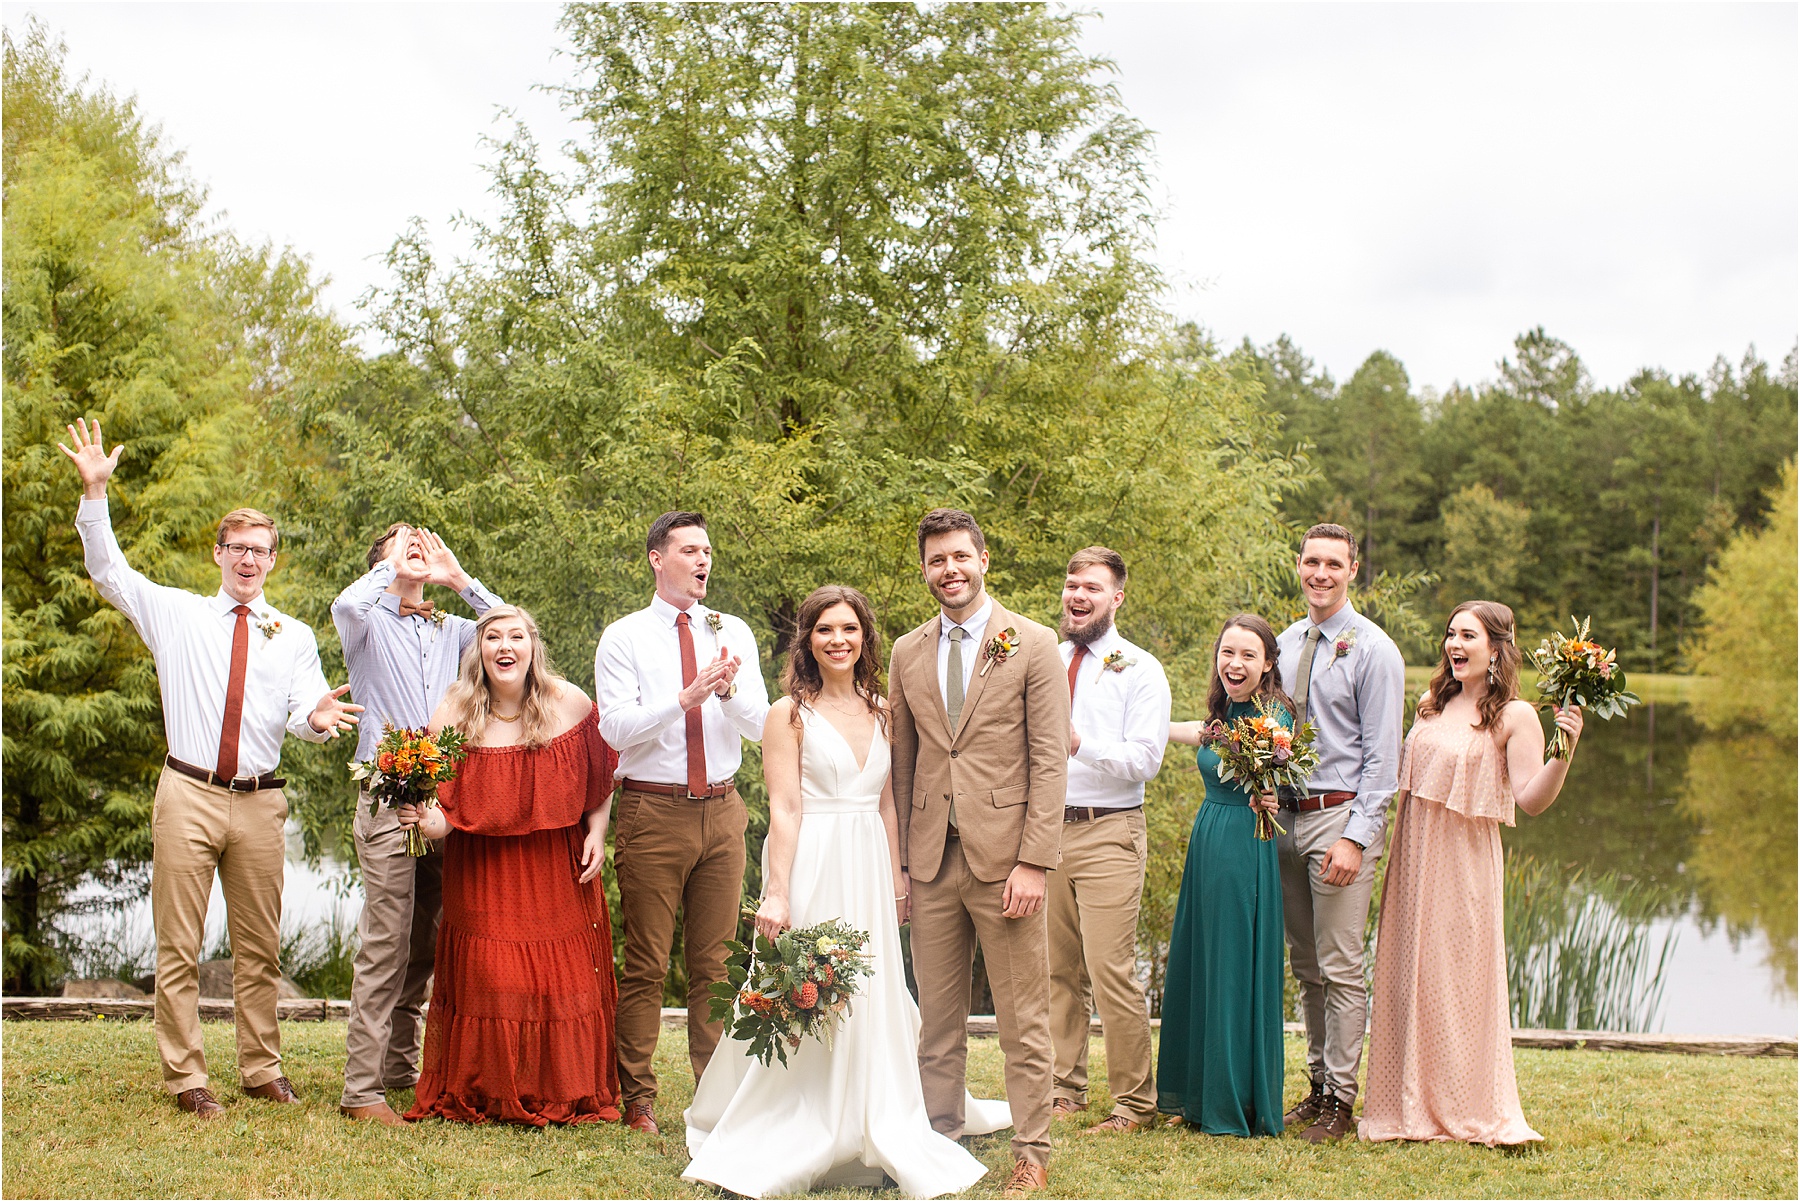 Wedding bridal party has fun celebrating with groom and bride